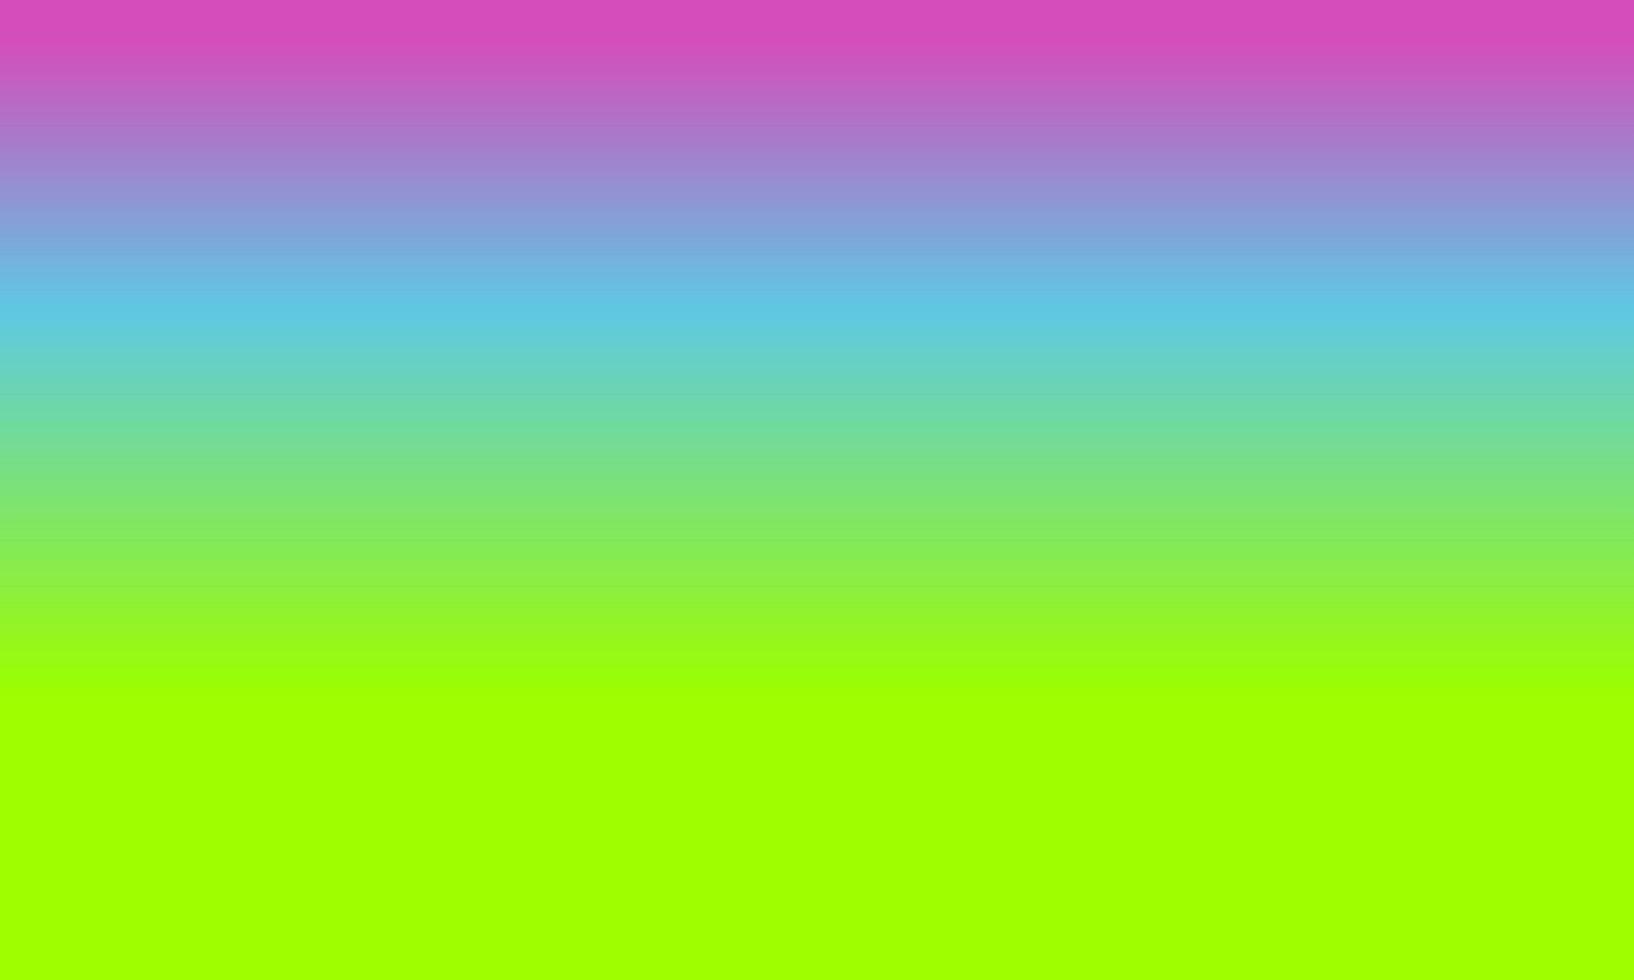 Design simple highlighter green,blue and pink gradient color illustration background photo